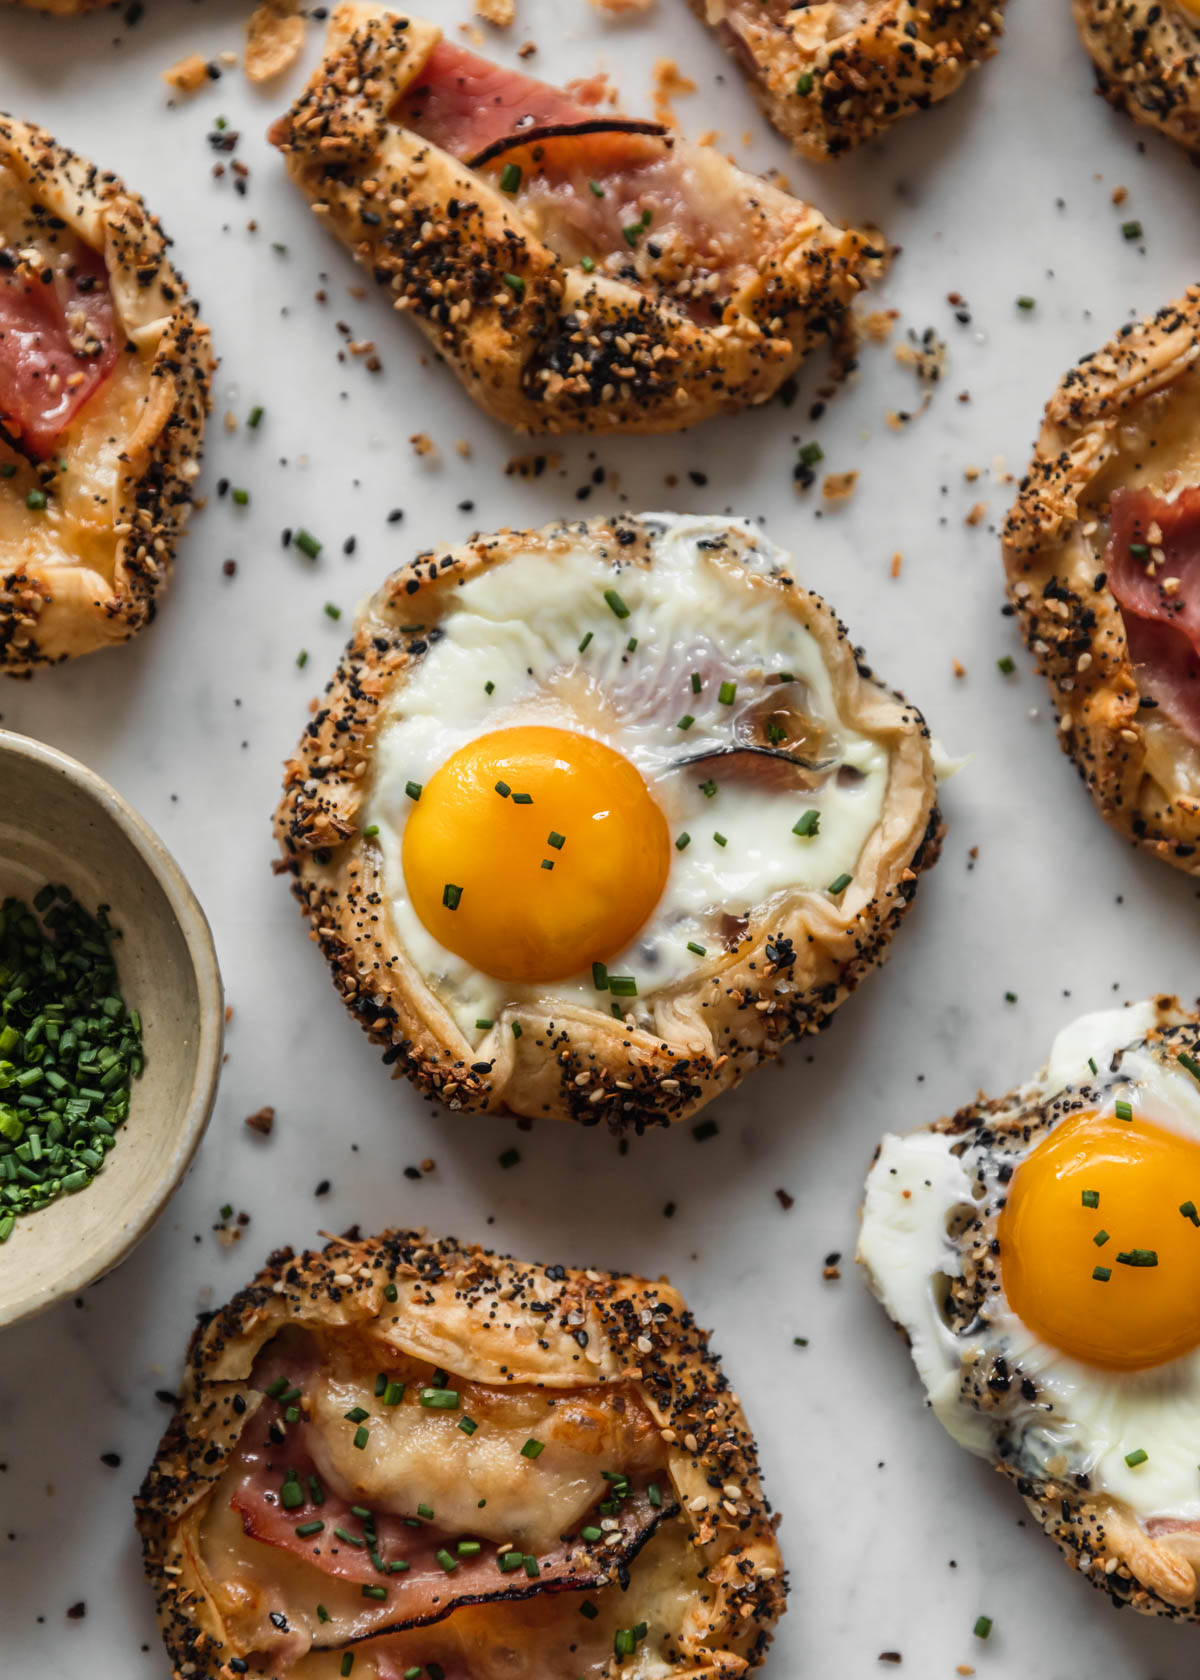 A closeup overhead image of a savory croque madame galette with a runny egg on a white marble counter surrounded by rows of galettes and a white bowl of chives.